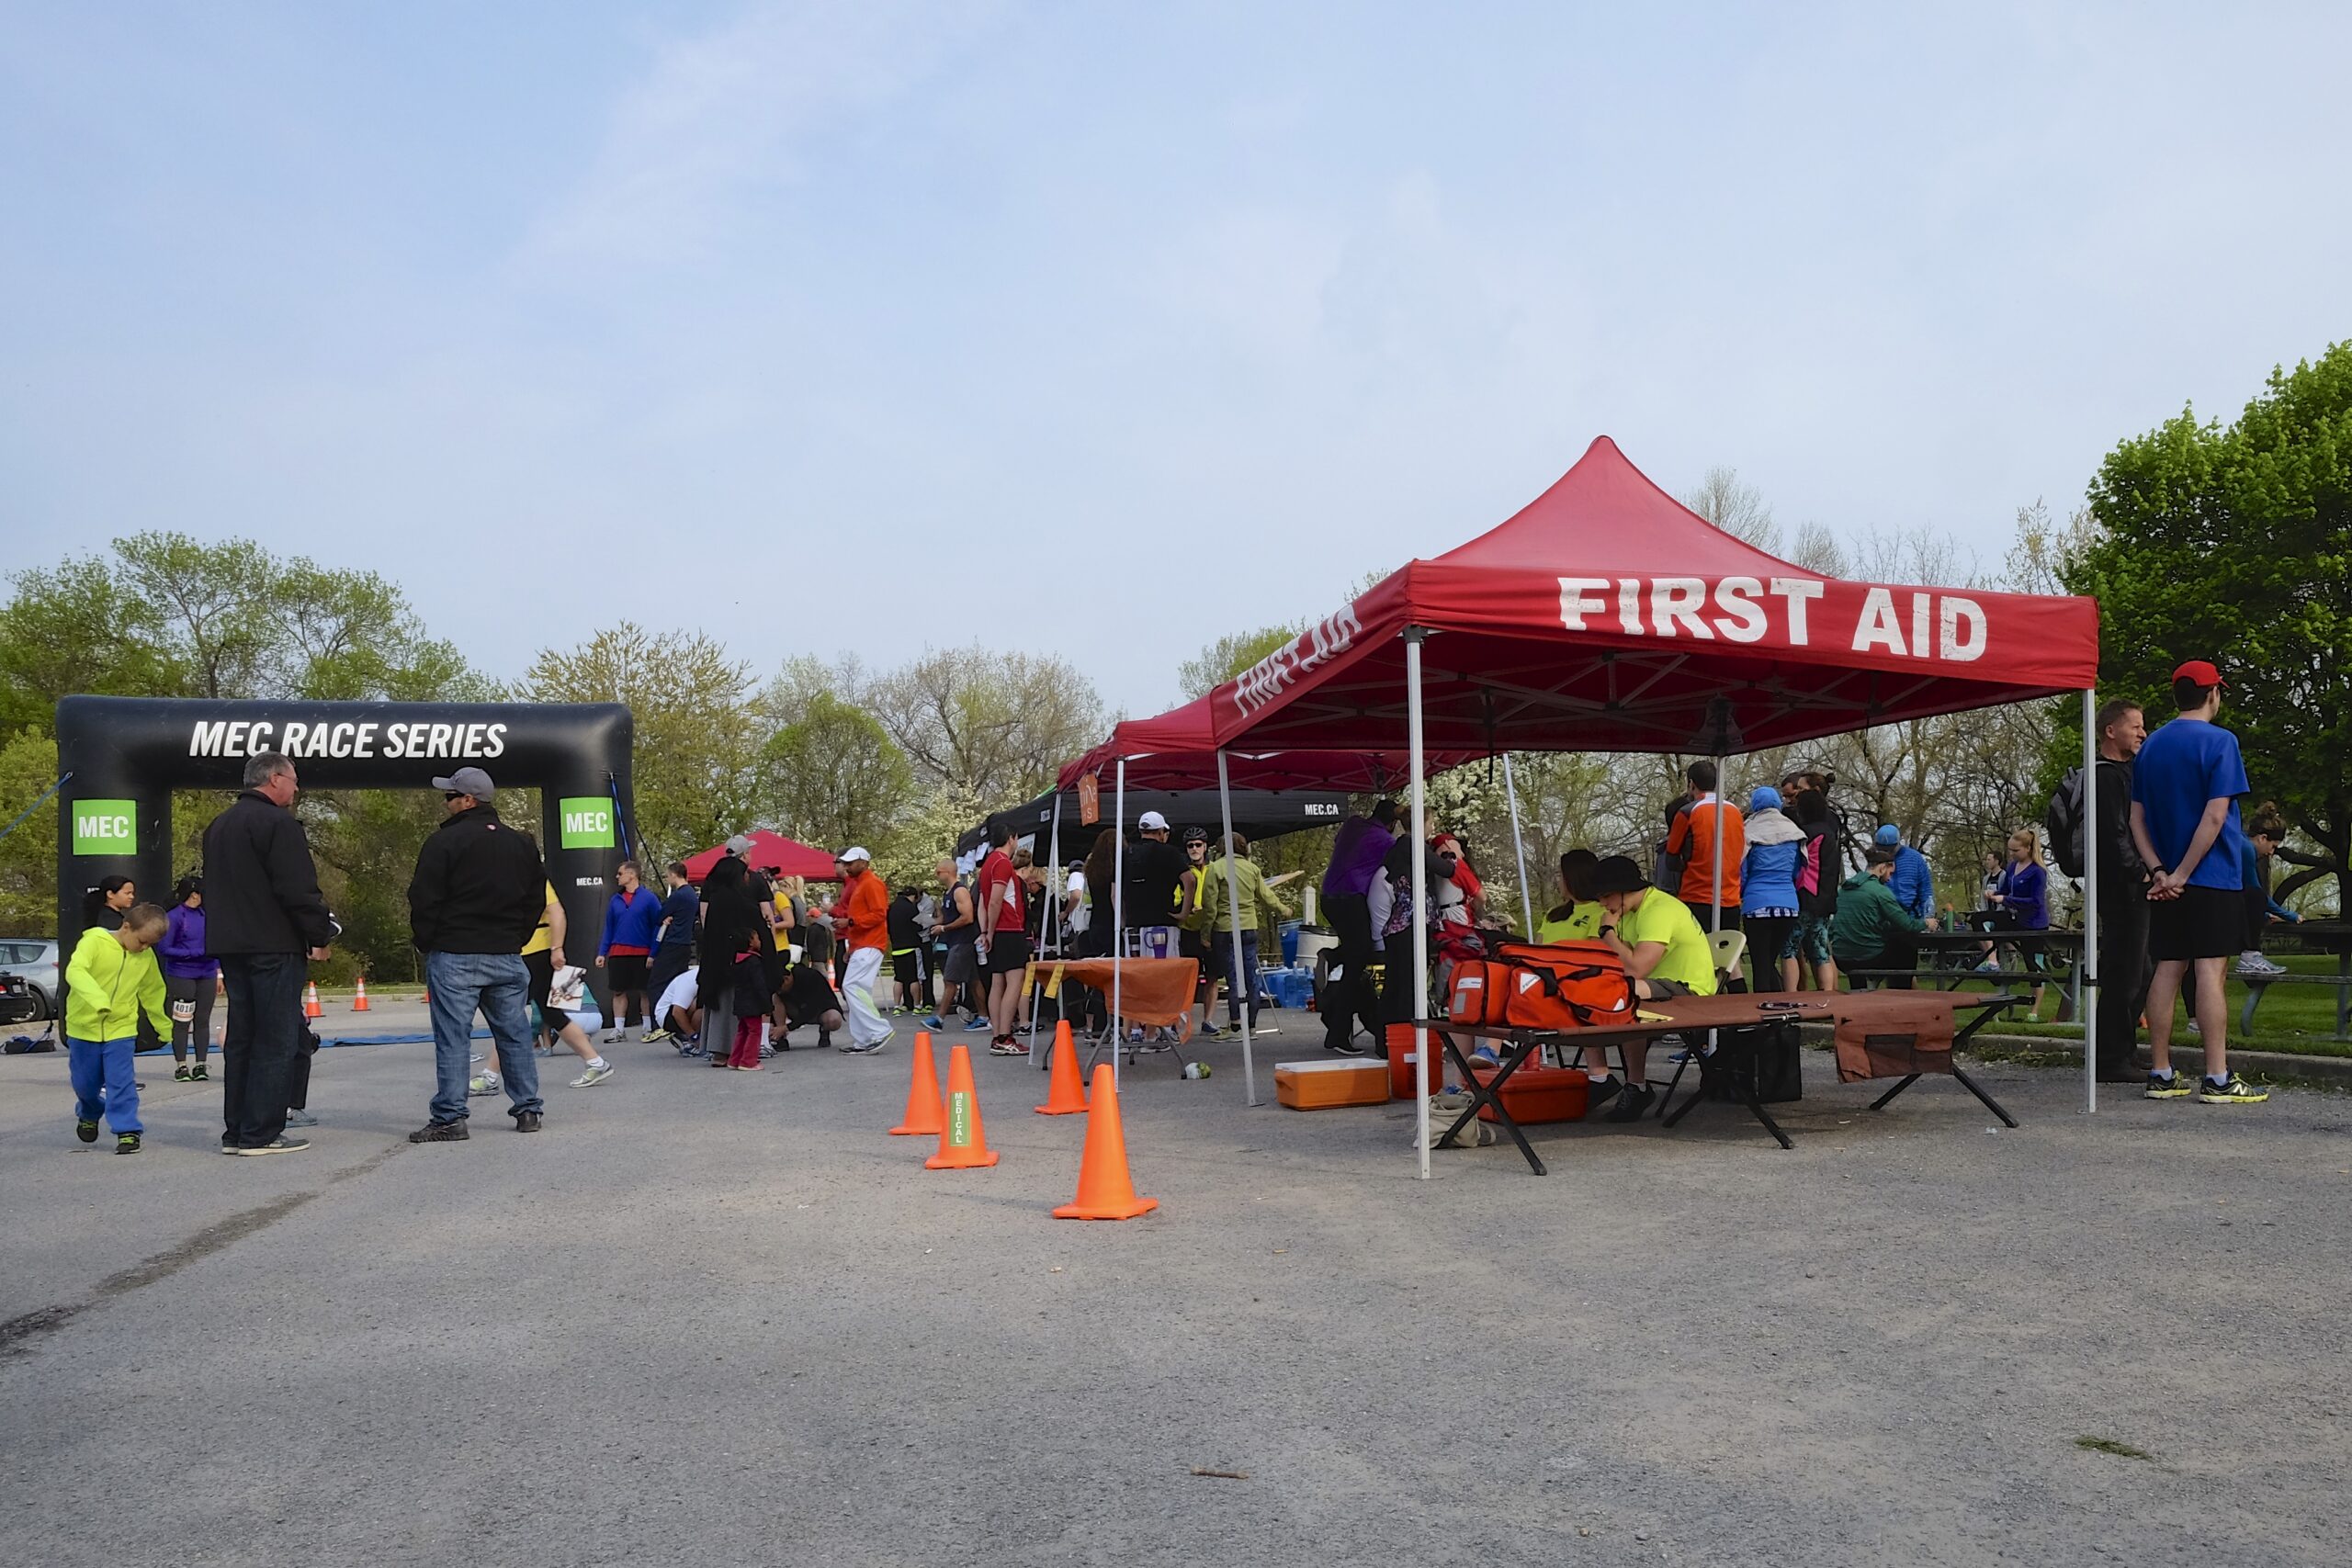 tent for first aid station in an event